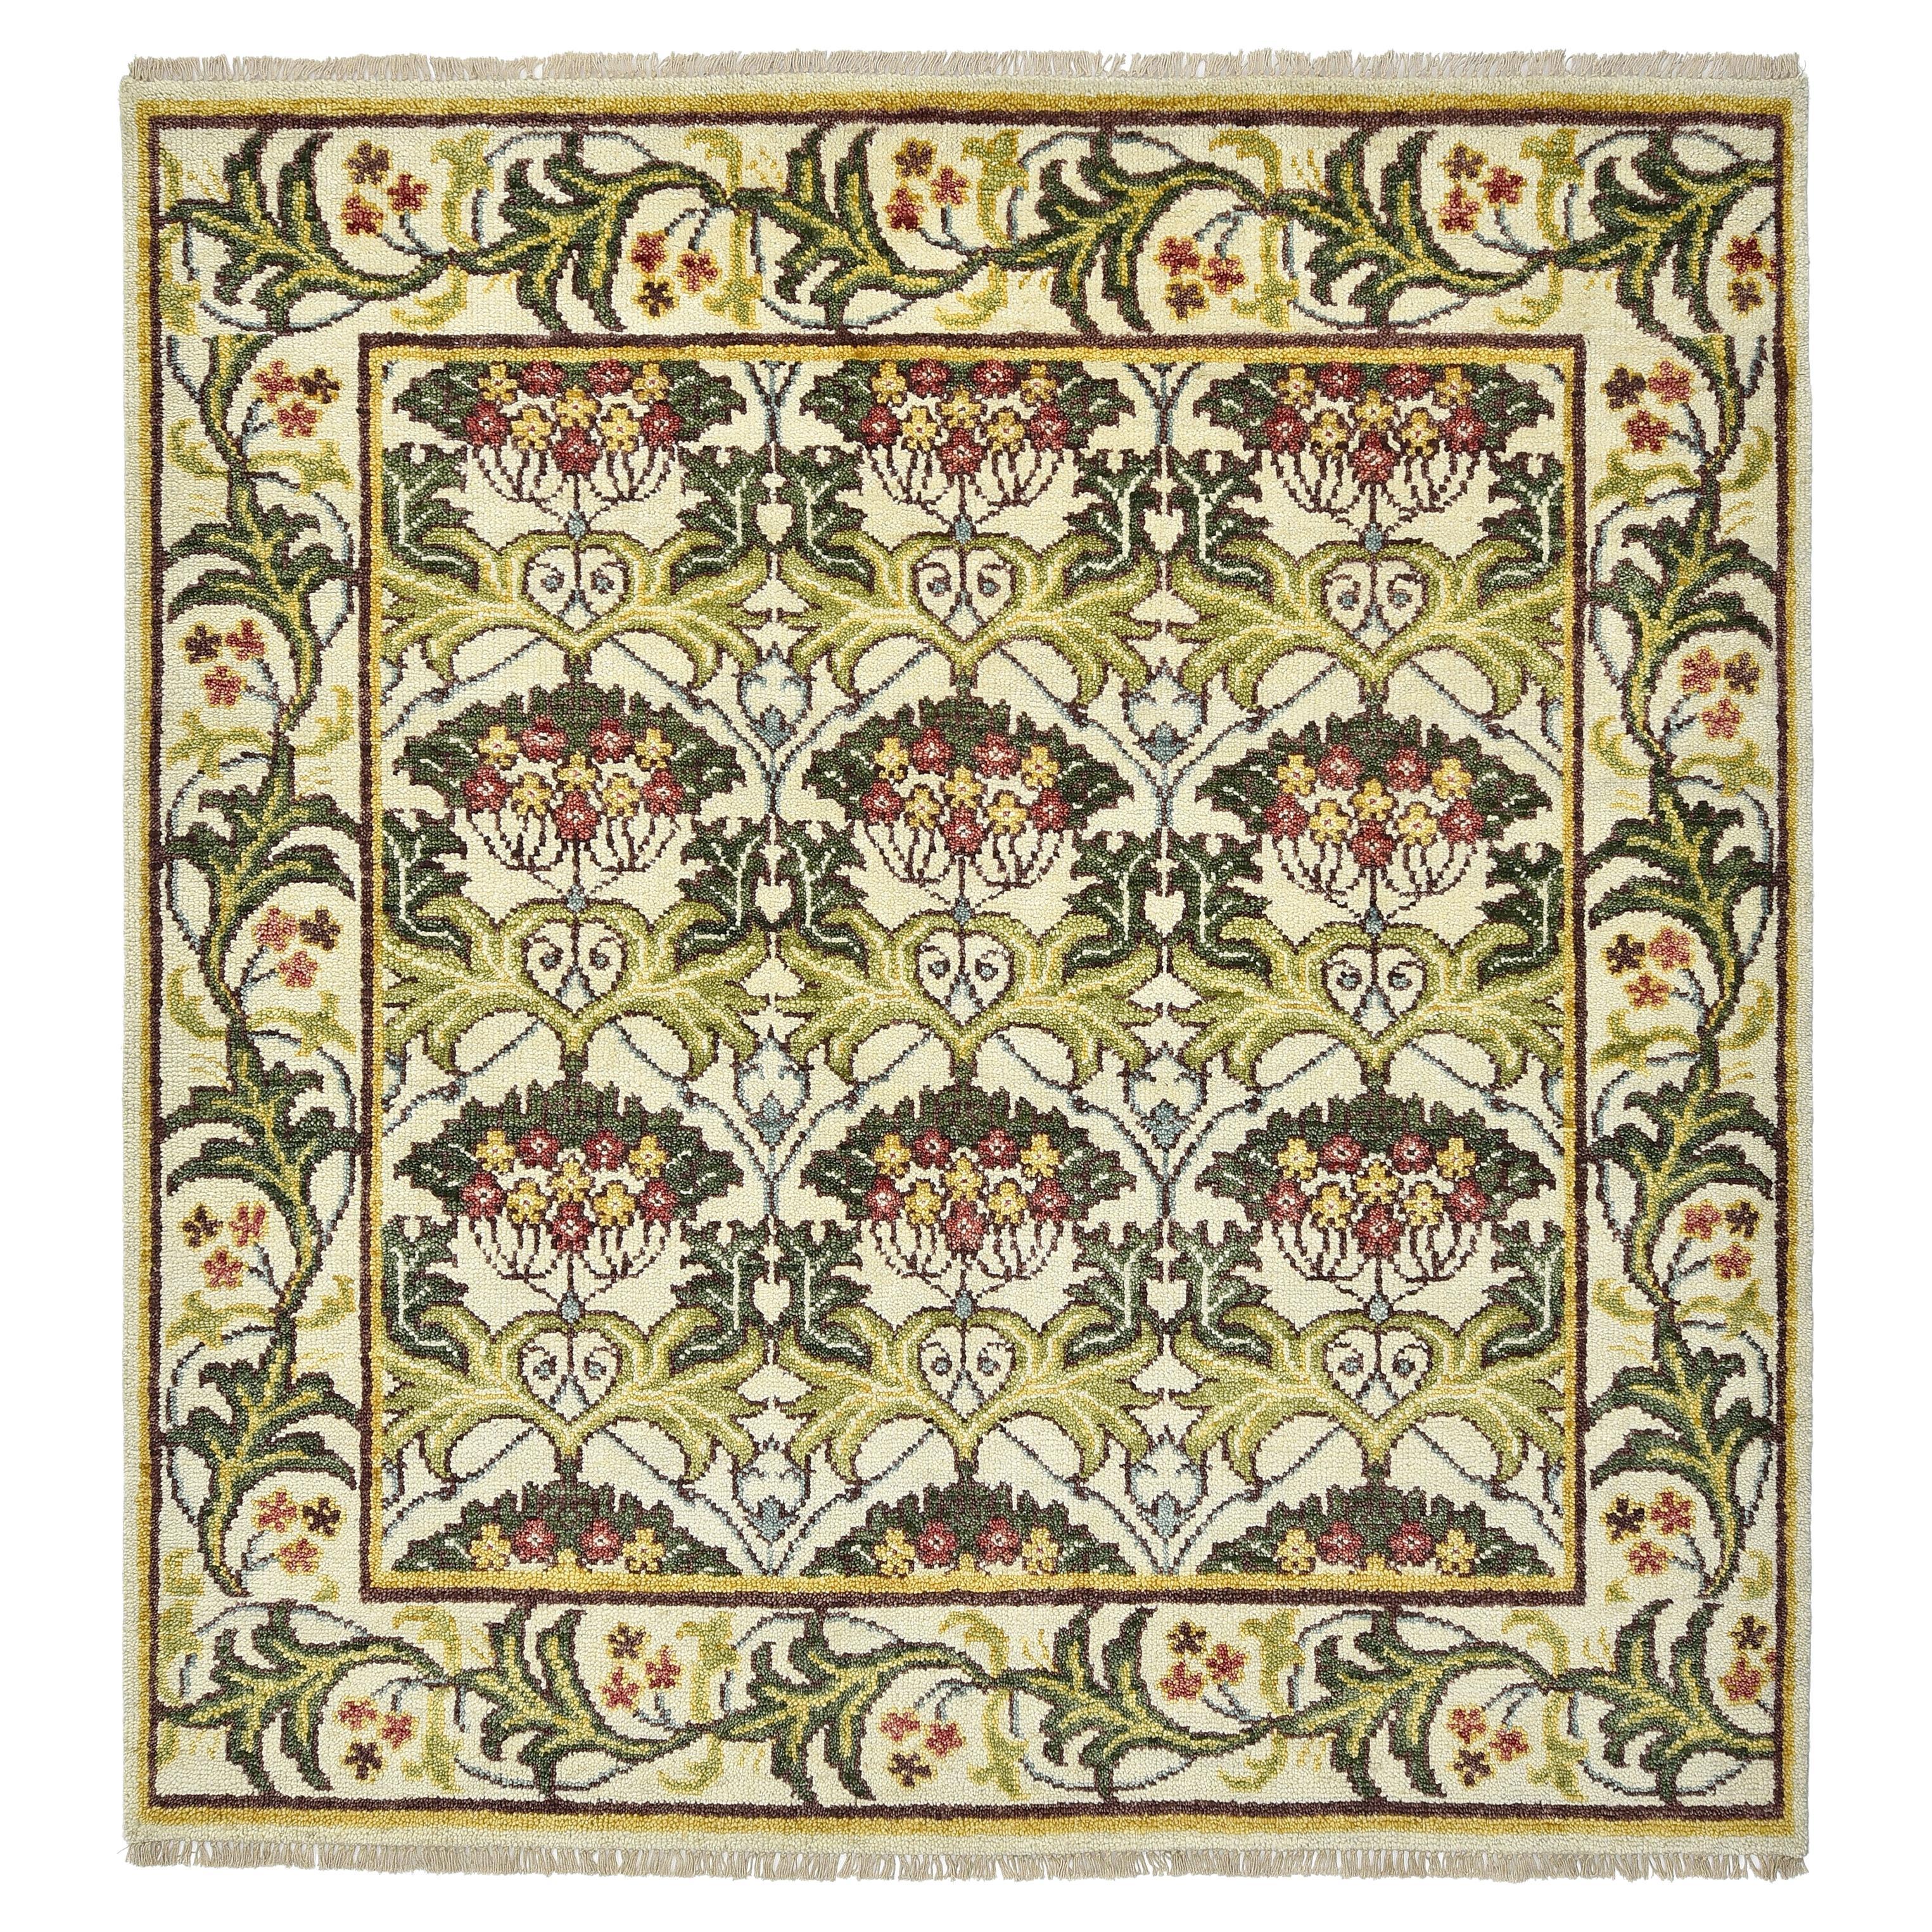 Ivory William Morris Inspired Area Rug For Sale